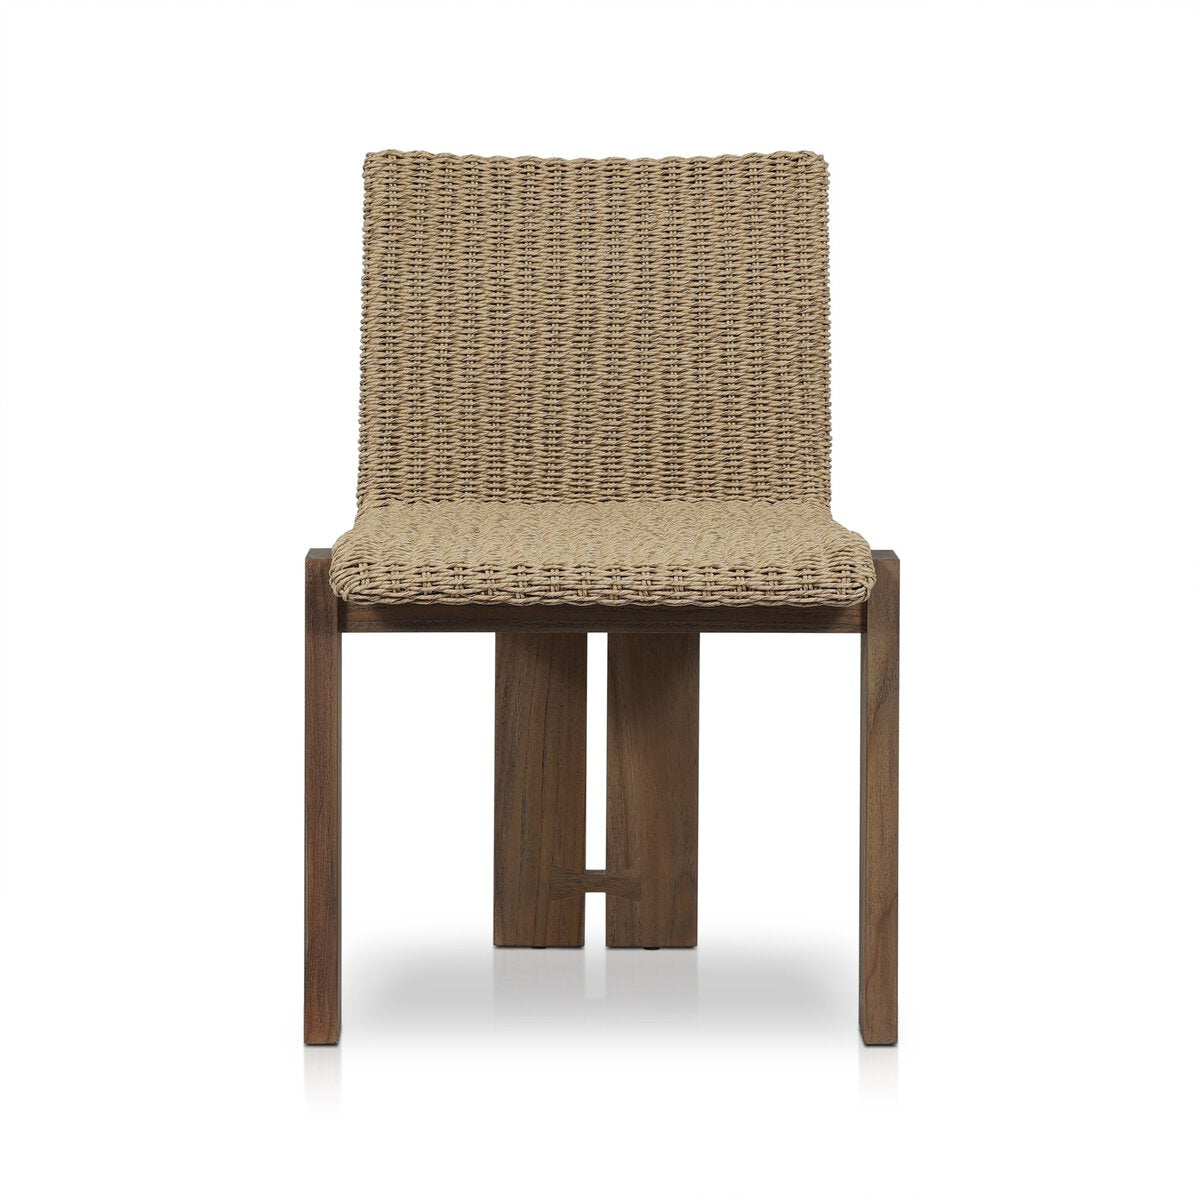 ROXY OUTDOOR DINING CHAIR